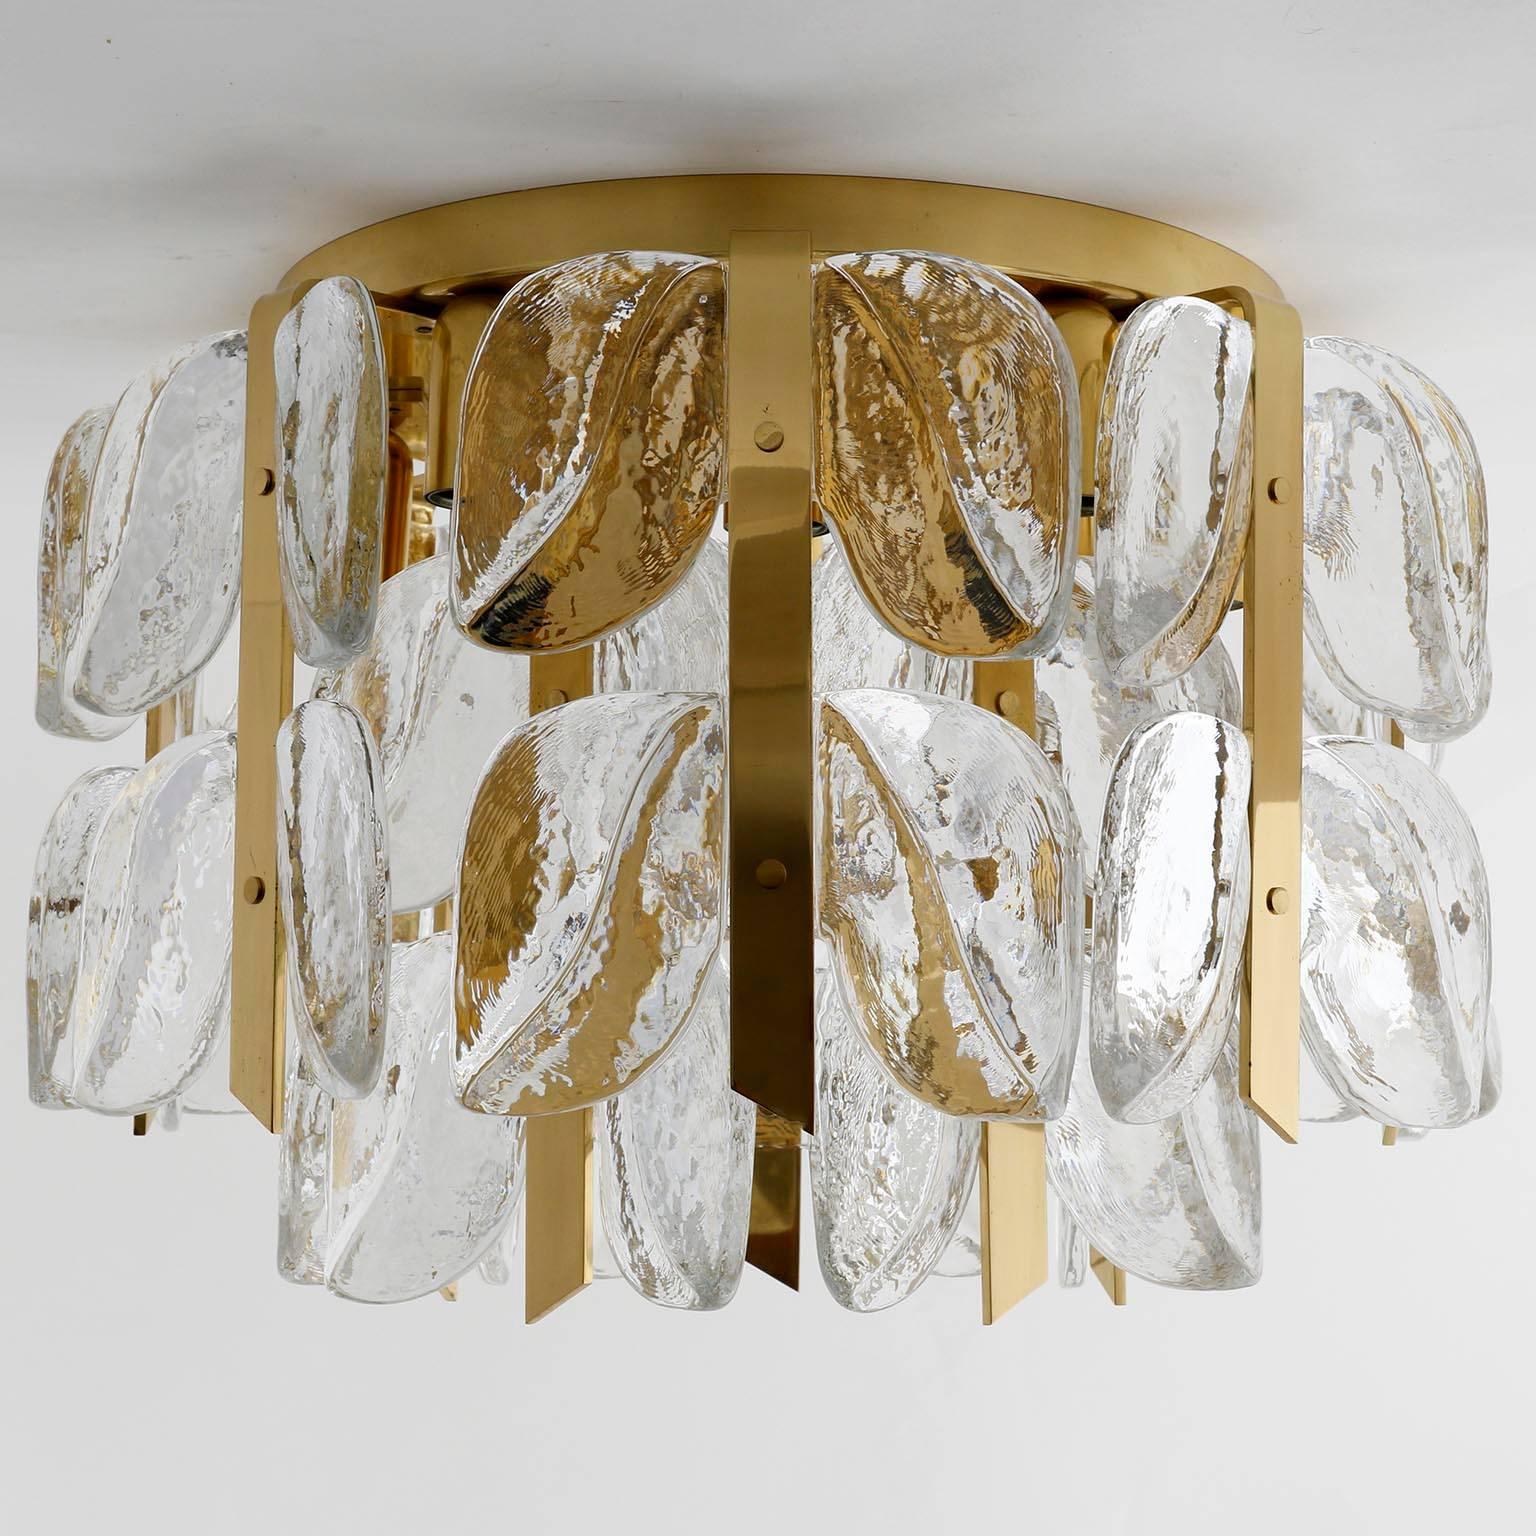 One of two high quality flushmount light fixtures model 'Florida' by J.T. Kalmar, Austria, manufactured in midcentury, circa 1970 (late 1960s or early 1970s).
These Hollywood Regency lights are made of polished brass and large fire-polished